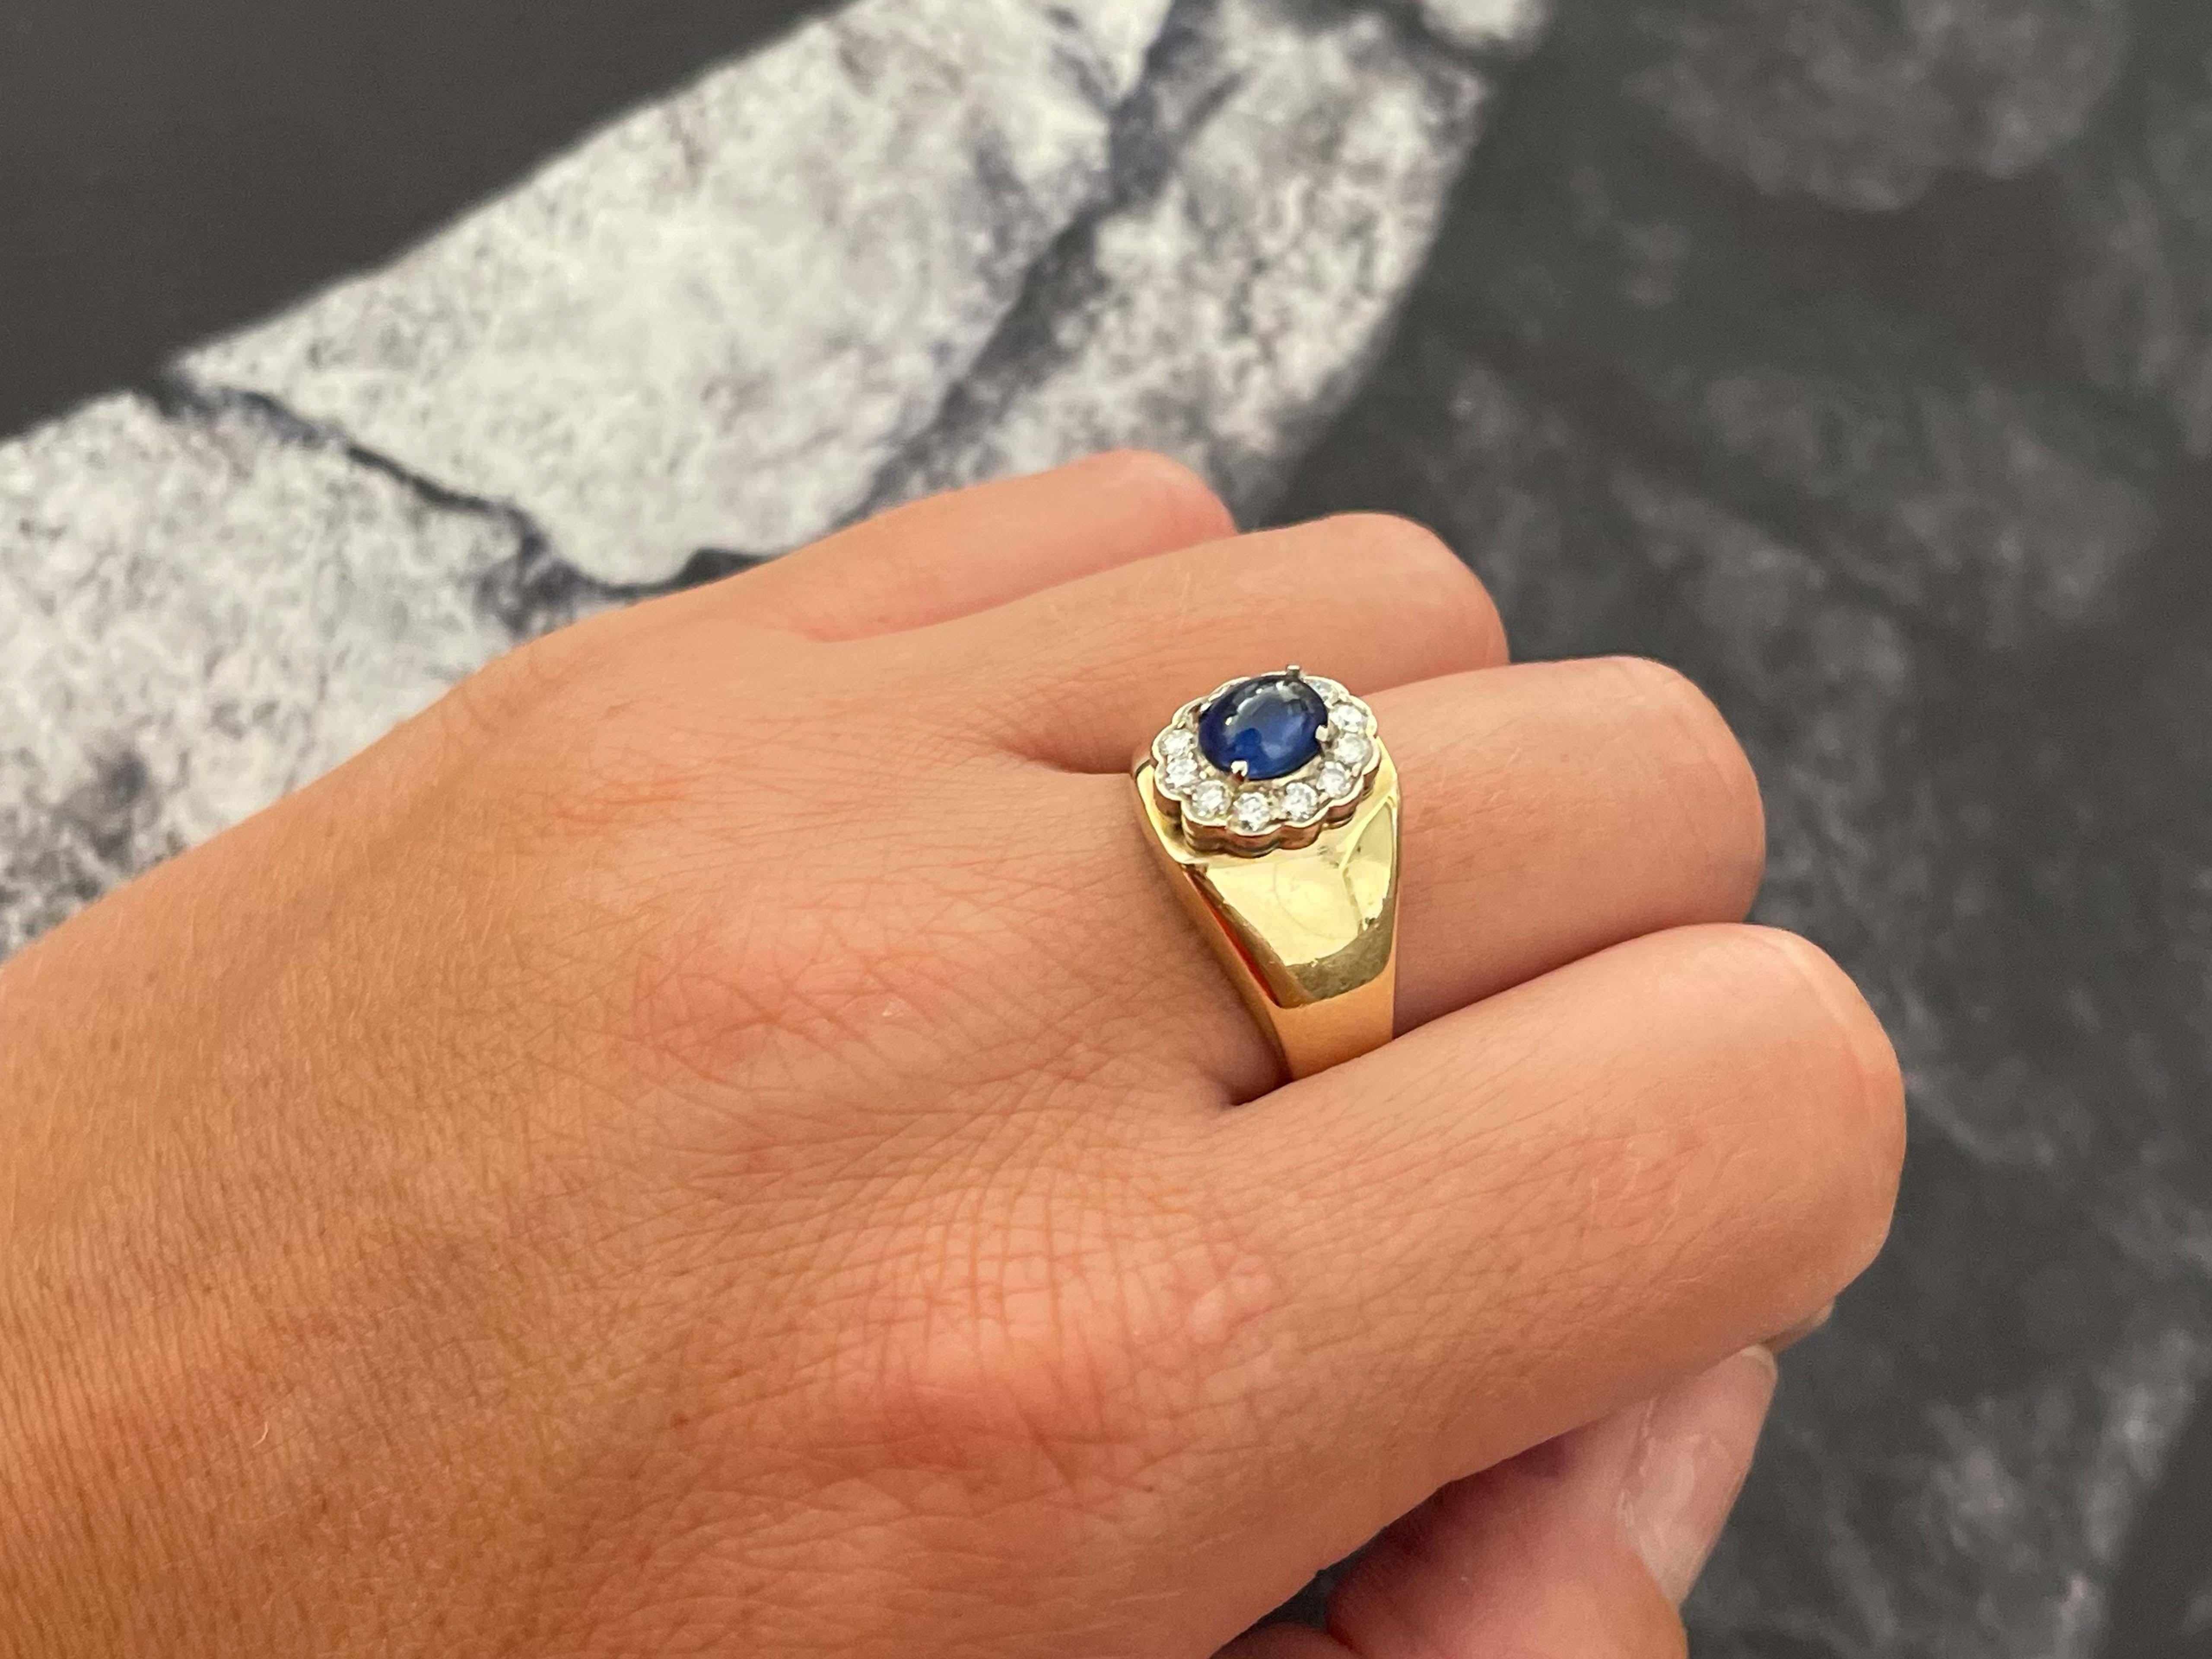 Item Specifications:

Metal: 14K Yellow Gold

Style: Statement Ring

Ring Size: 10 (resizing available for a fee)

Total Weight: 11.5 Grams

Diamond Count: 12

Diamond Carat Weight: 0.30

Diamond Color: H

Diamond Clarity: VS

Gemstone